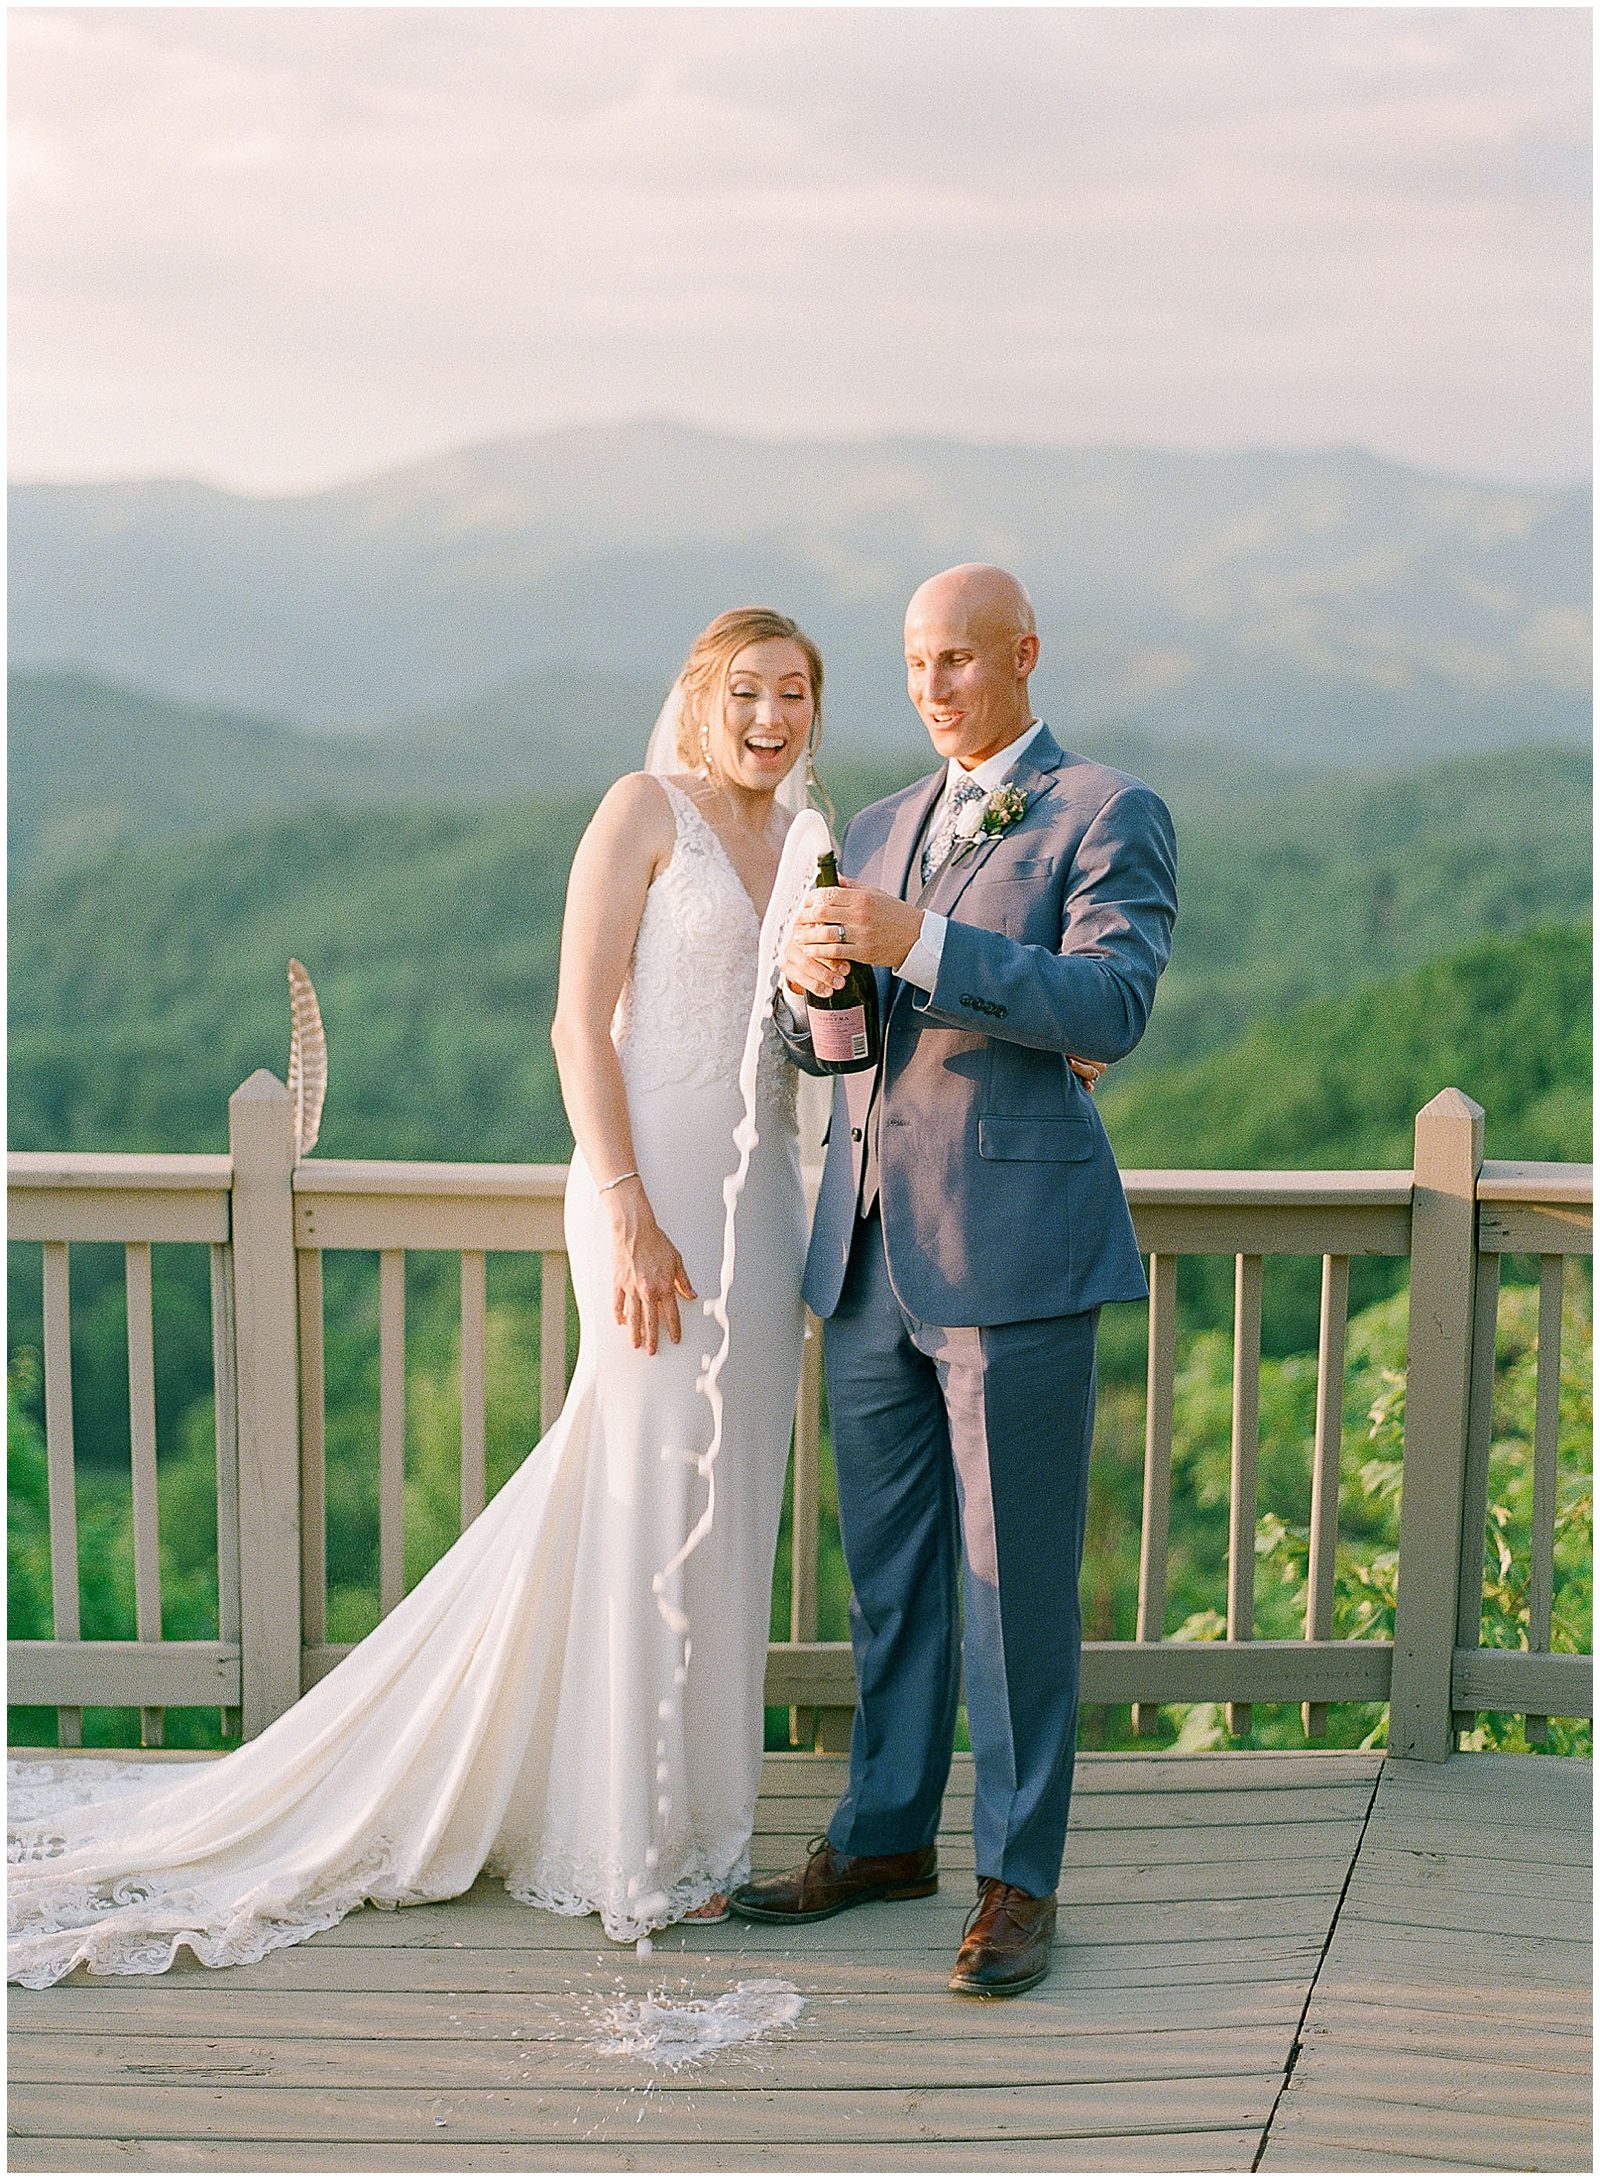 Couple Popping Champagne With Mountain View Photo